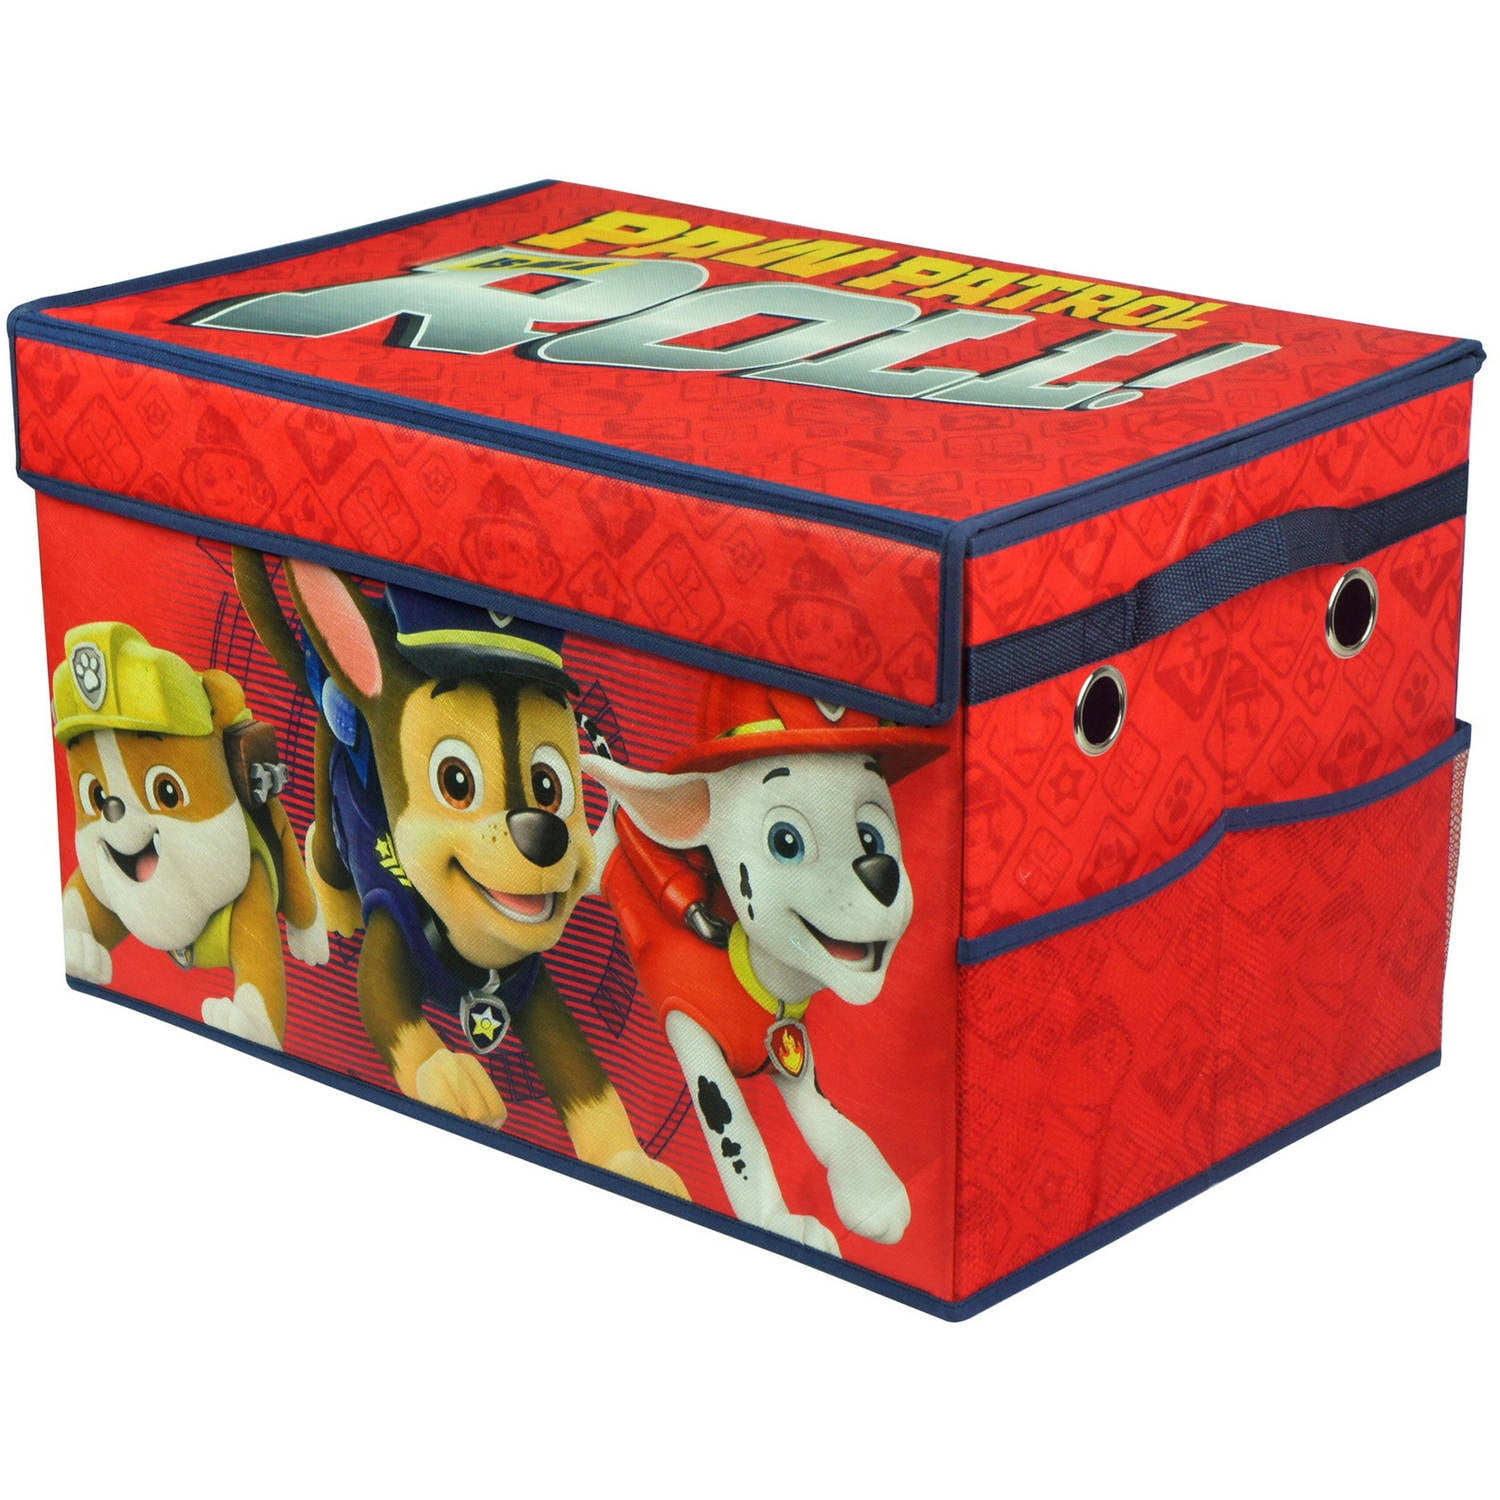 Nick Jr PAW Patrol Collapsible Fabric Toy Box Storage Chest Kids play bed room 